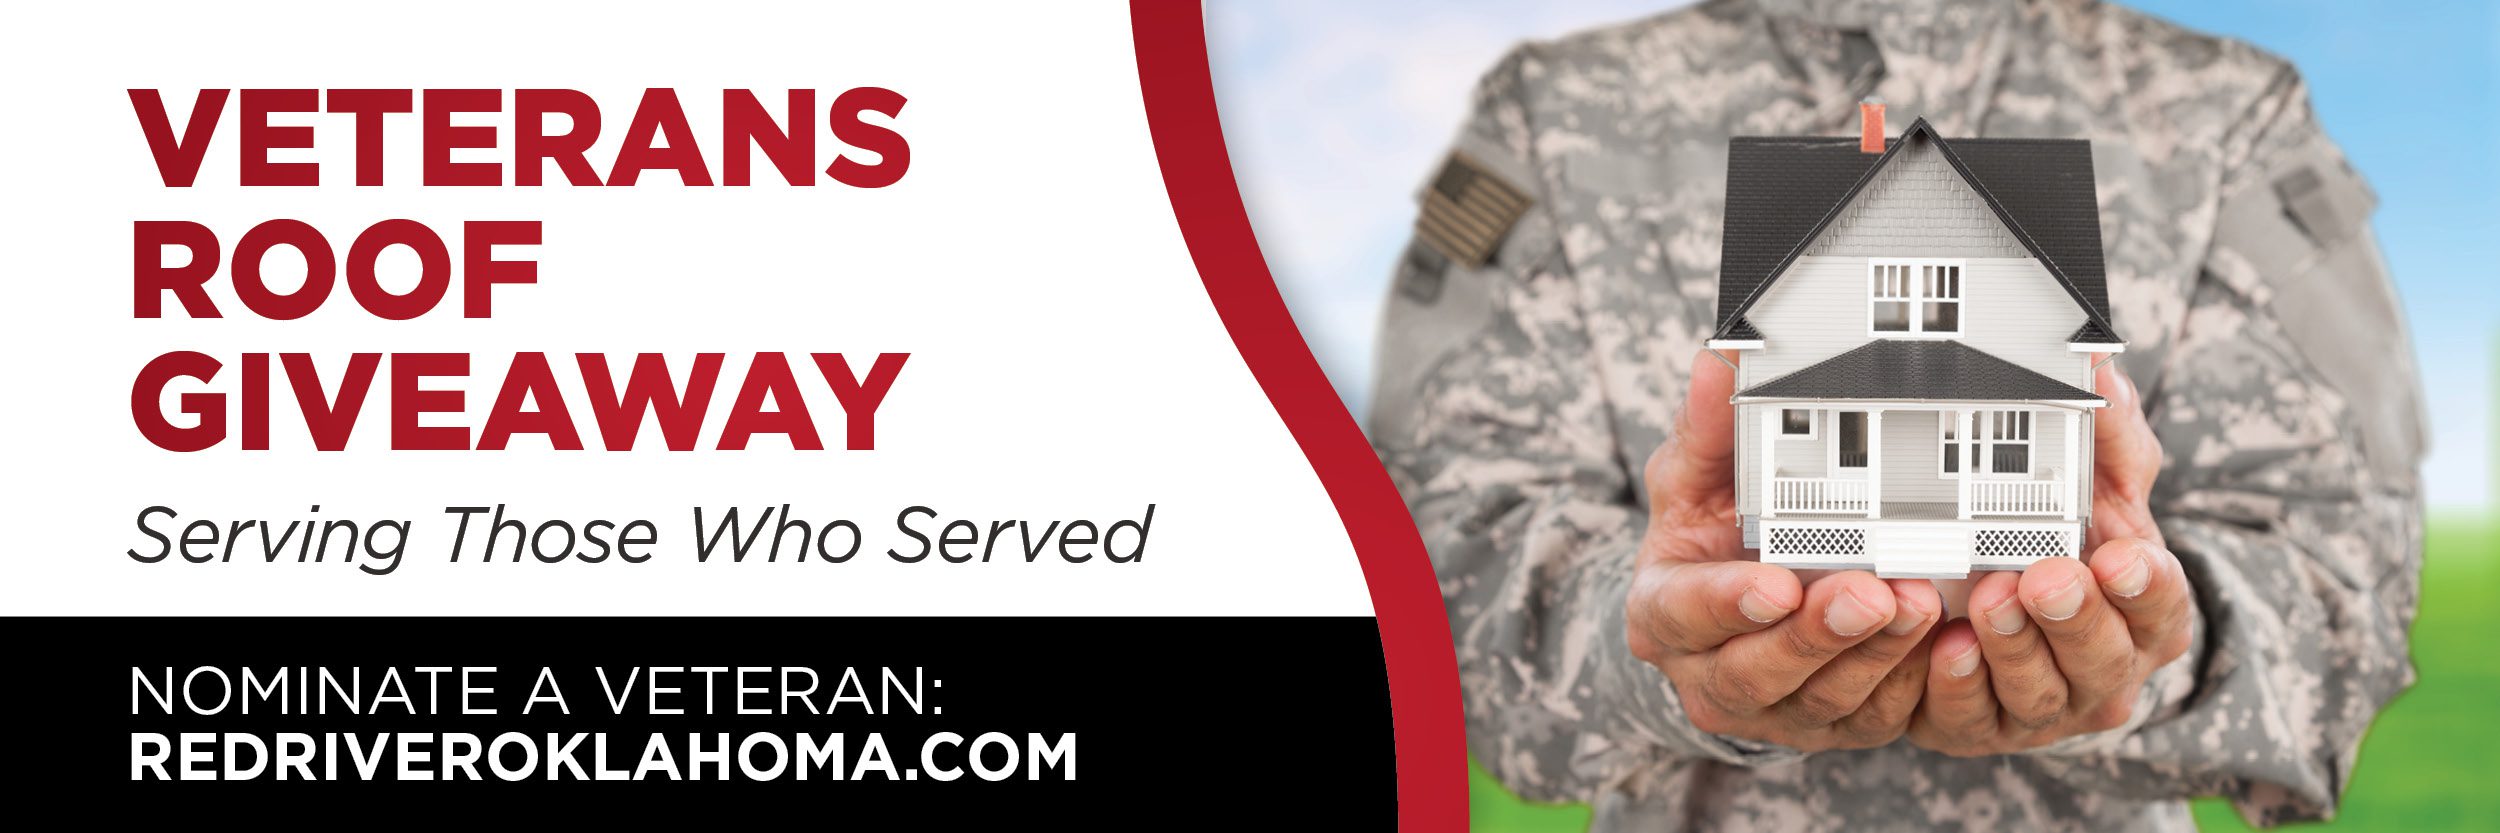 Veterans Roof Giveaway | Red River Roofing